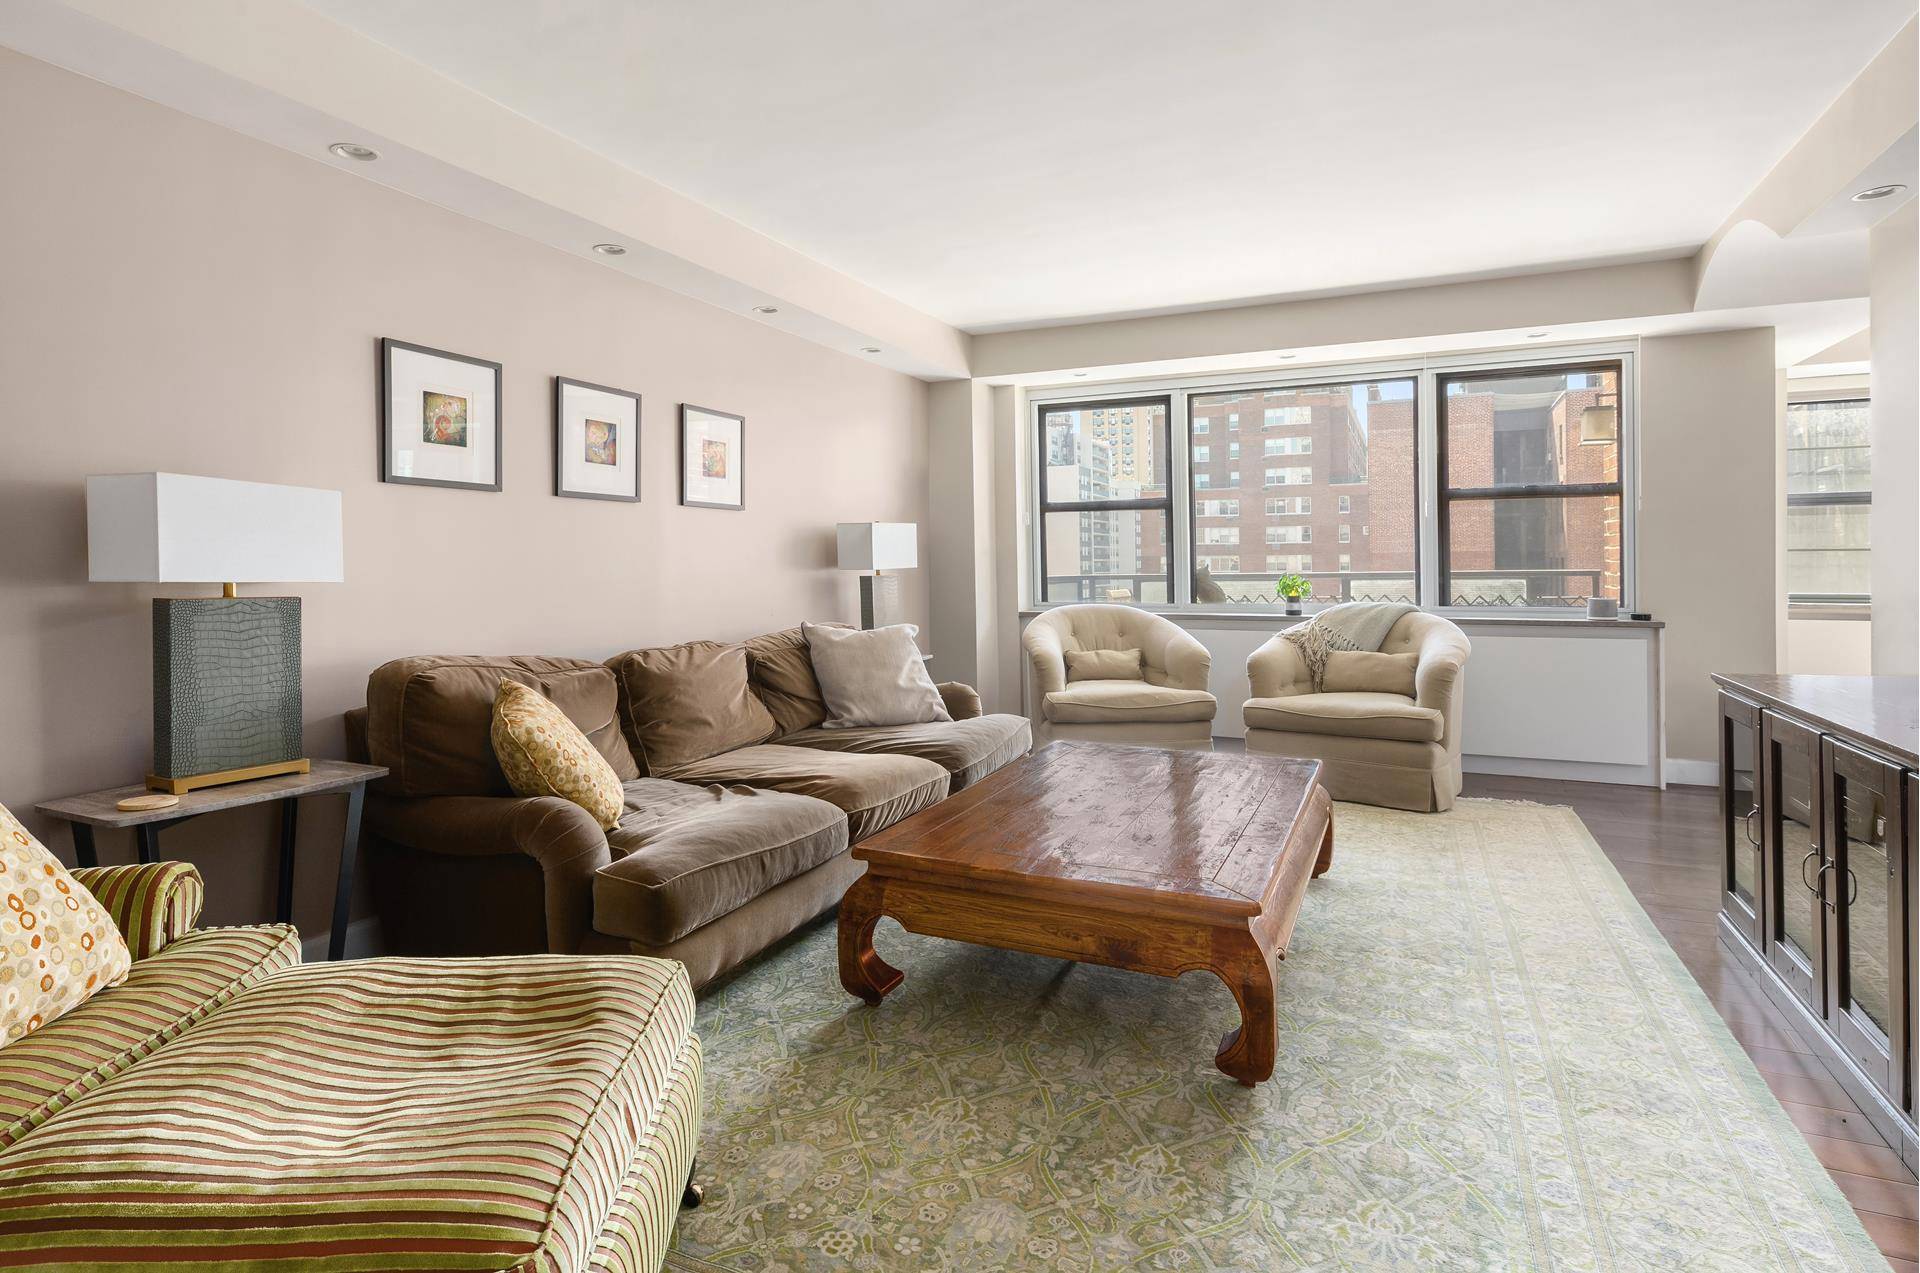 1800 square foot 3BR, 2 1 2 bath with Terrace in Gramercy Park with your own Key to park.